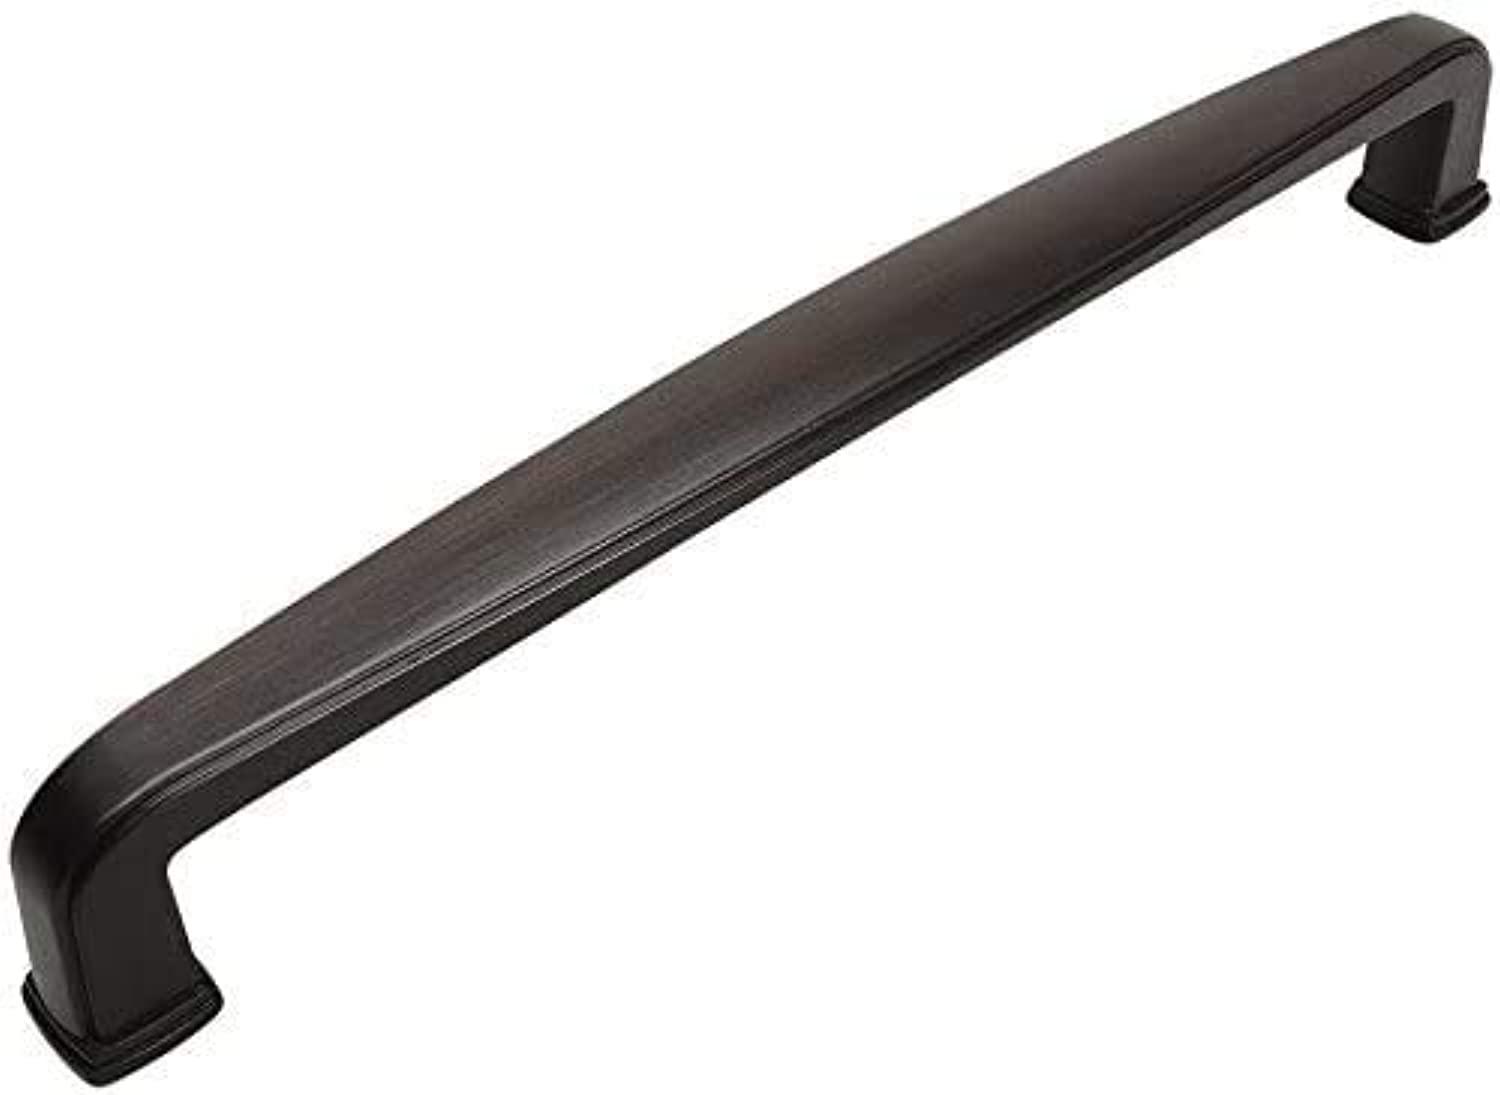 cosmas 4392-160orb oil rubbed bronze modern cabinet hardware handle pull - 6-5/16" inch (160mm) hole centers - 15 pack